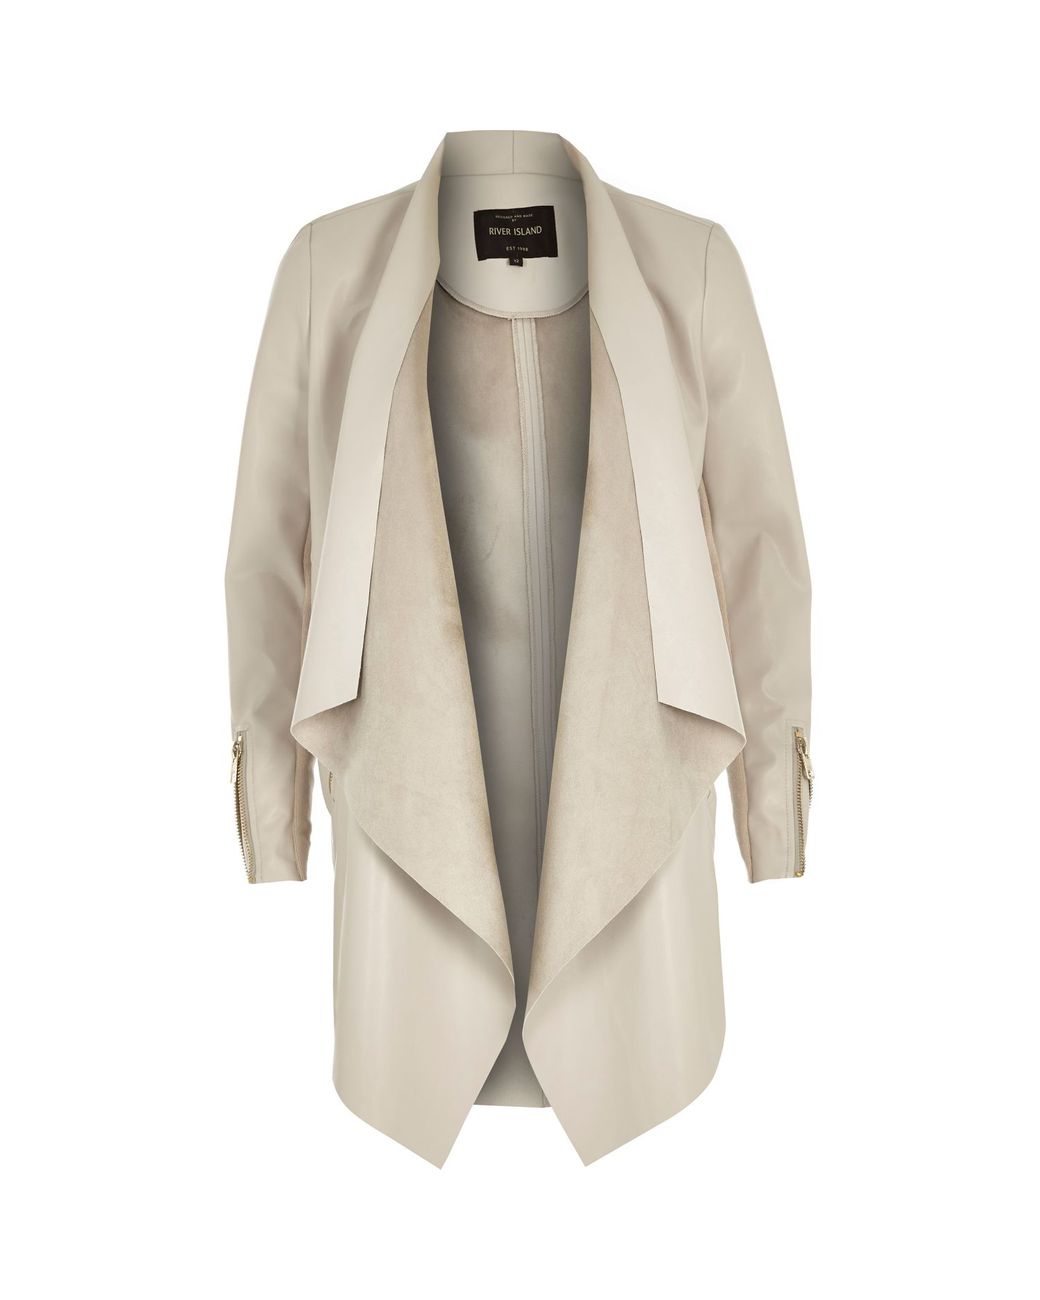 River Island Beige Leather-Look Waterfall Jacket in Natural | Lyst UK